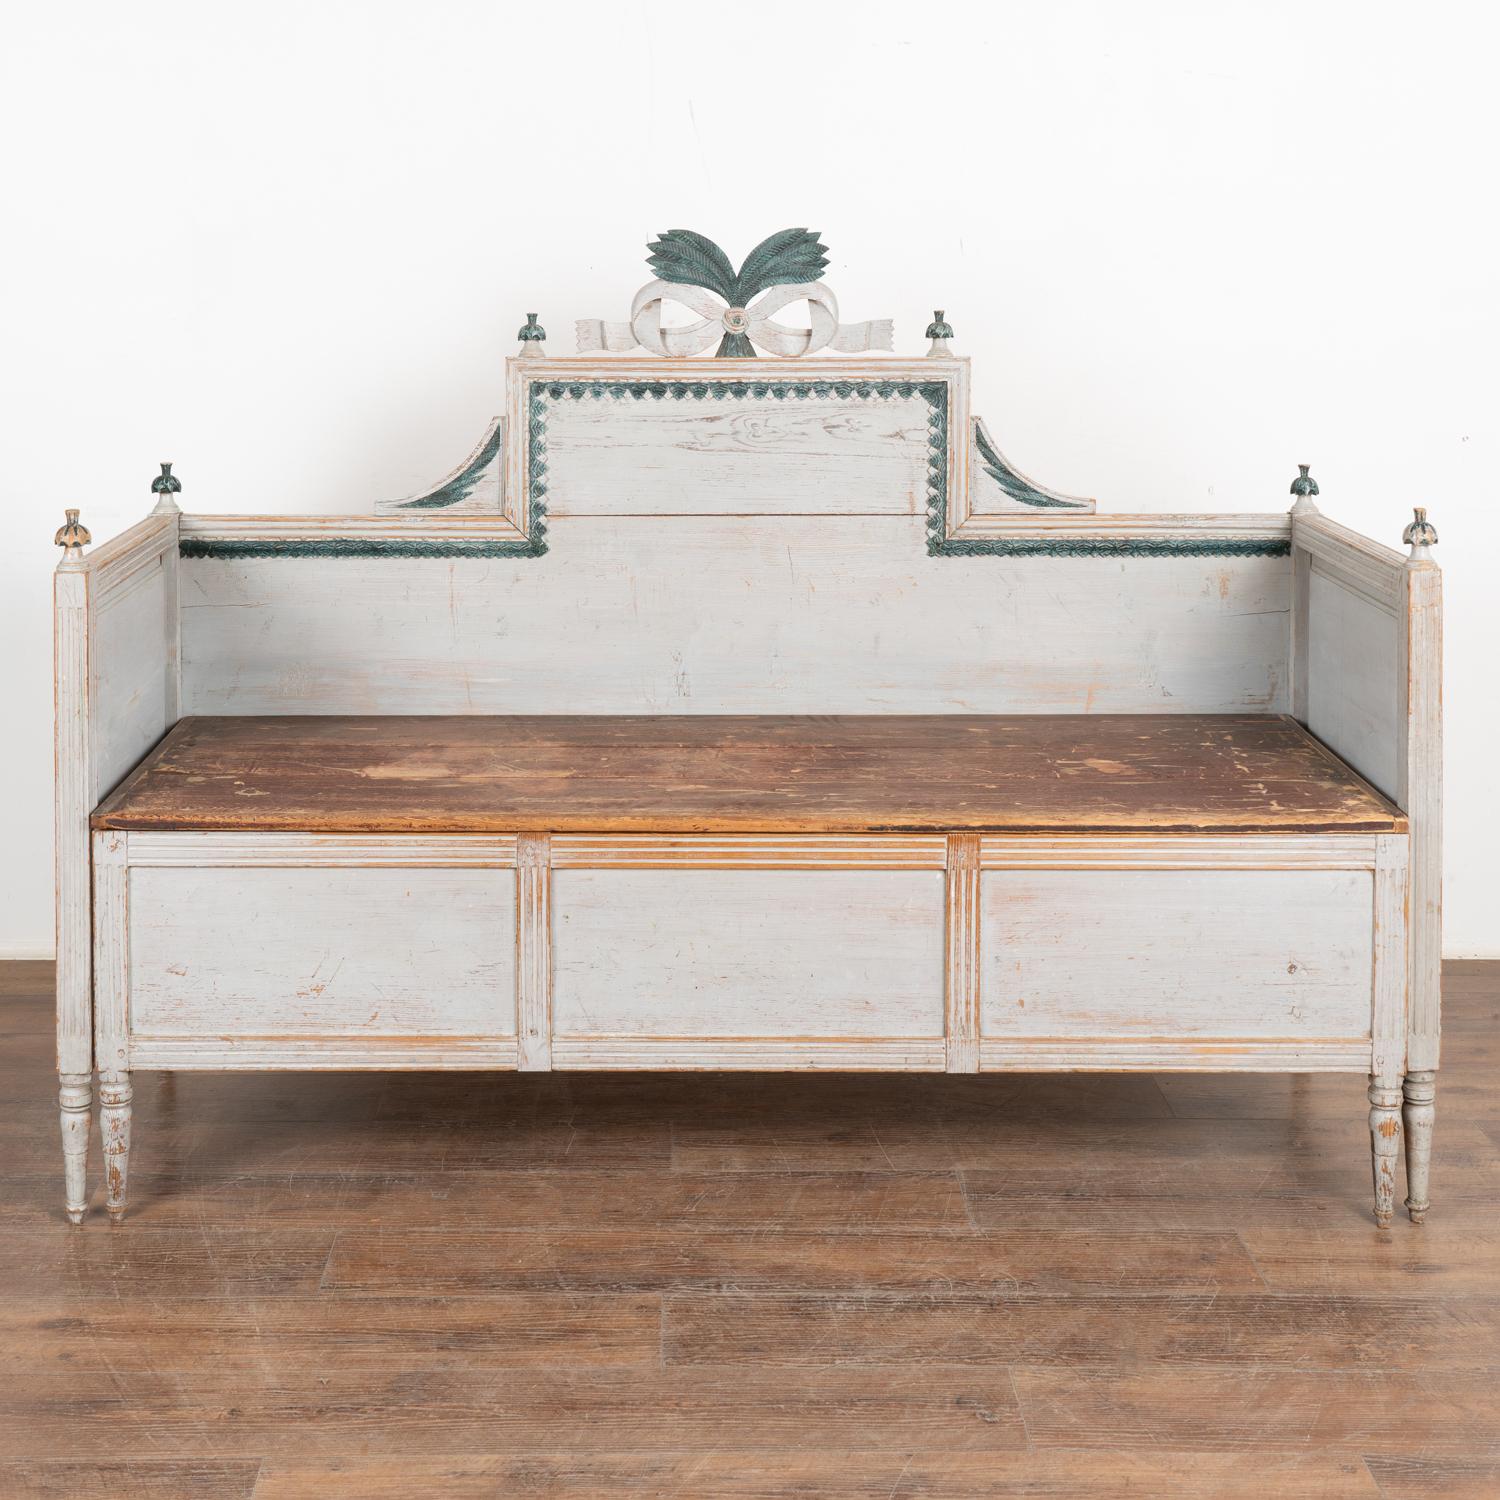 Swedish Original Gray Painted Gustavian Bench with Storage, Sweden circa 1820-40 For Sale